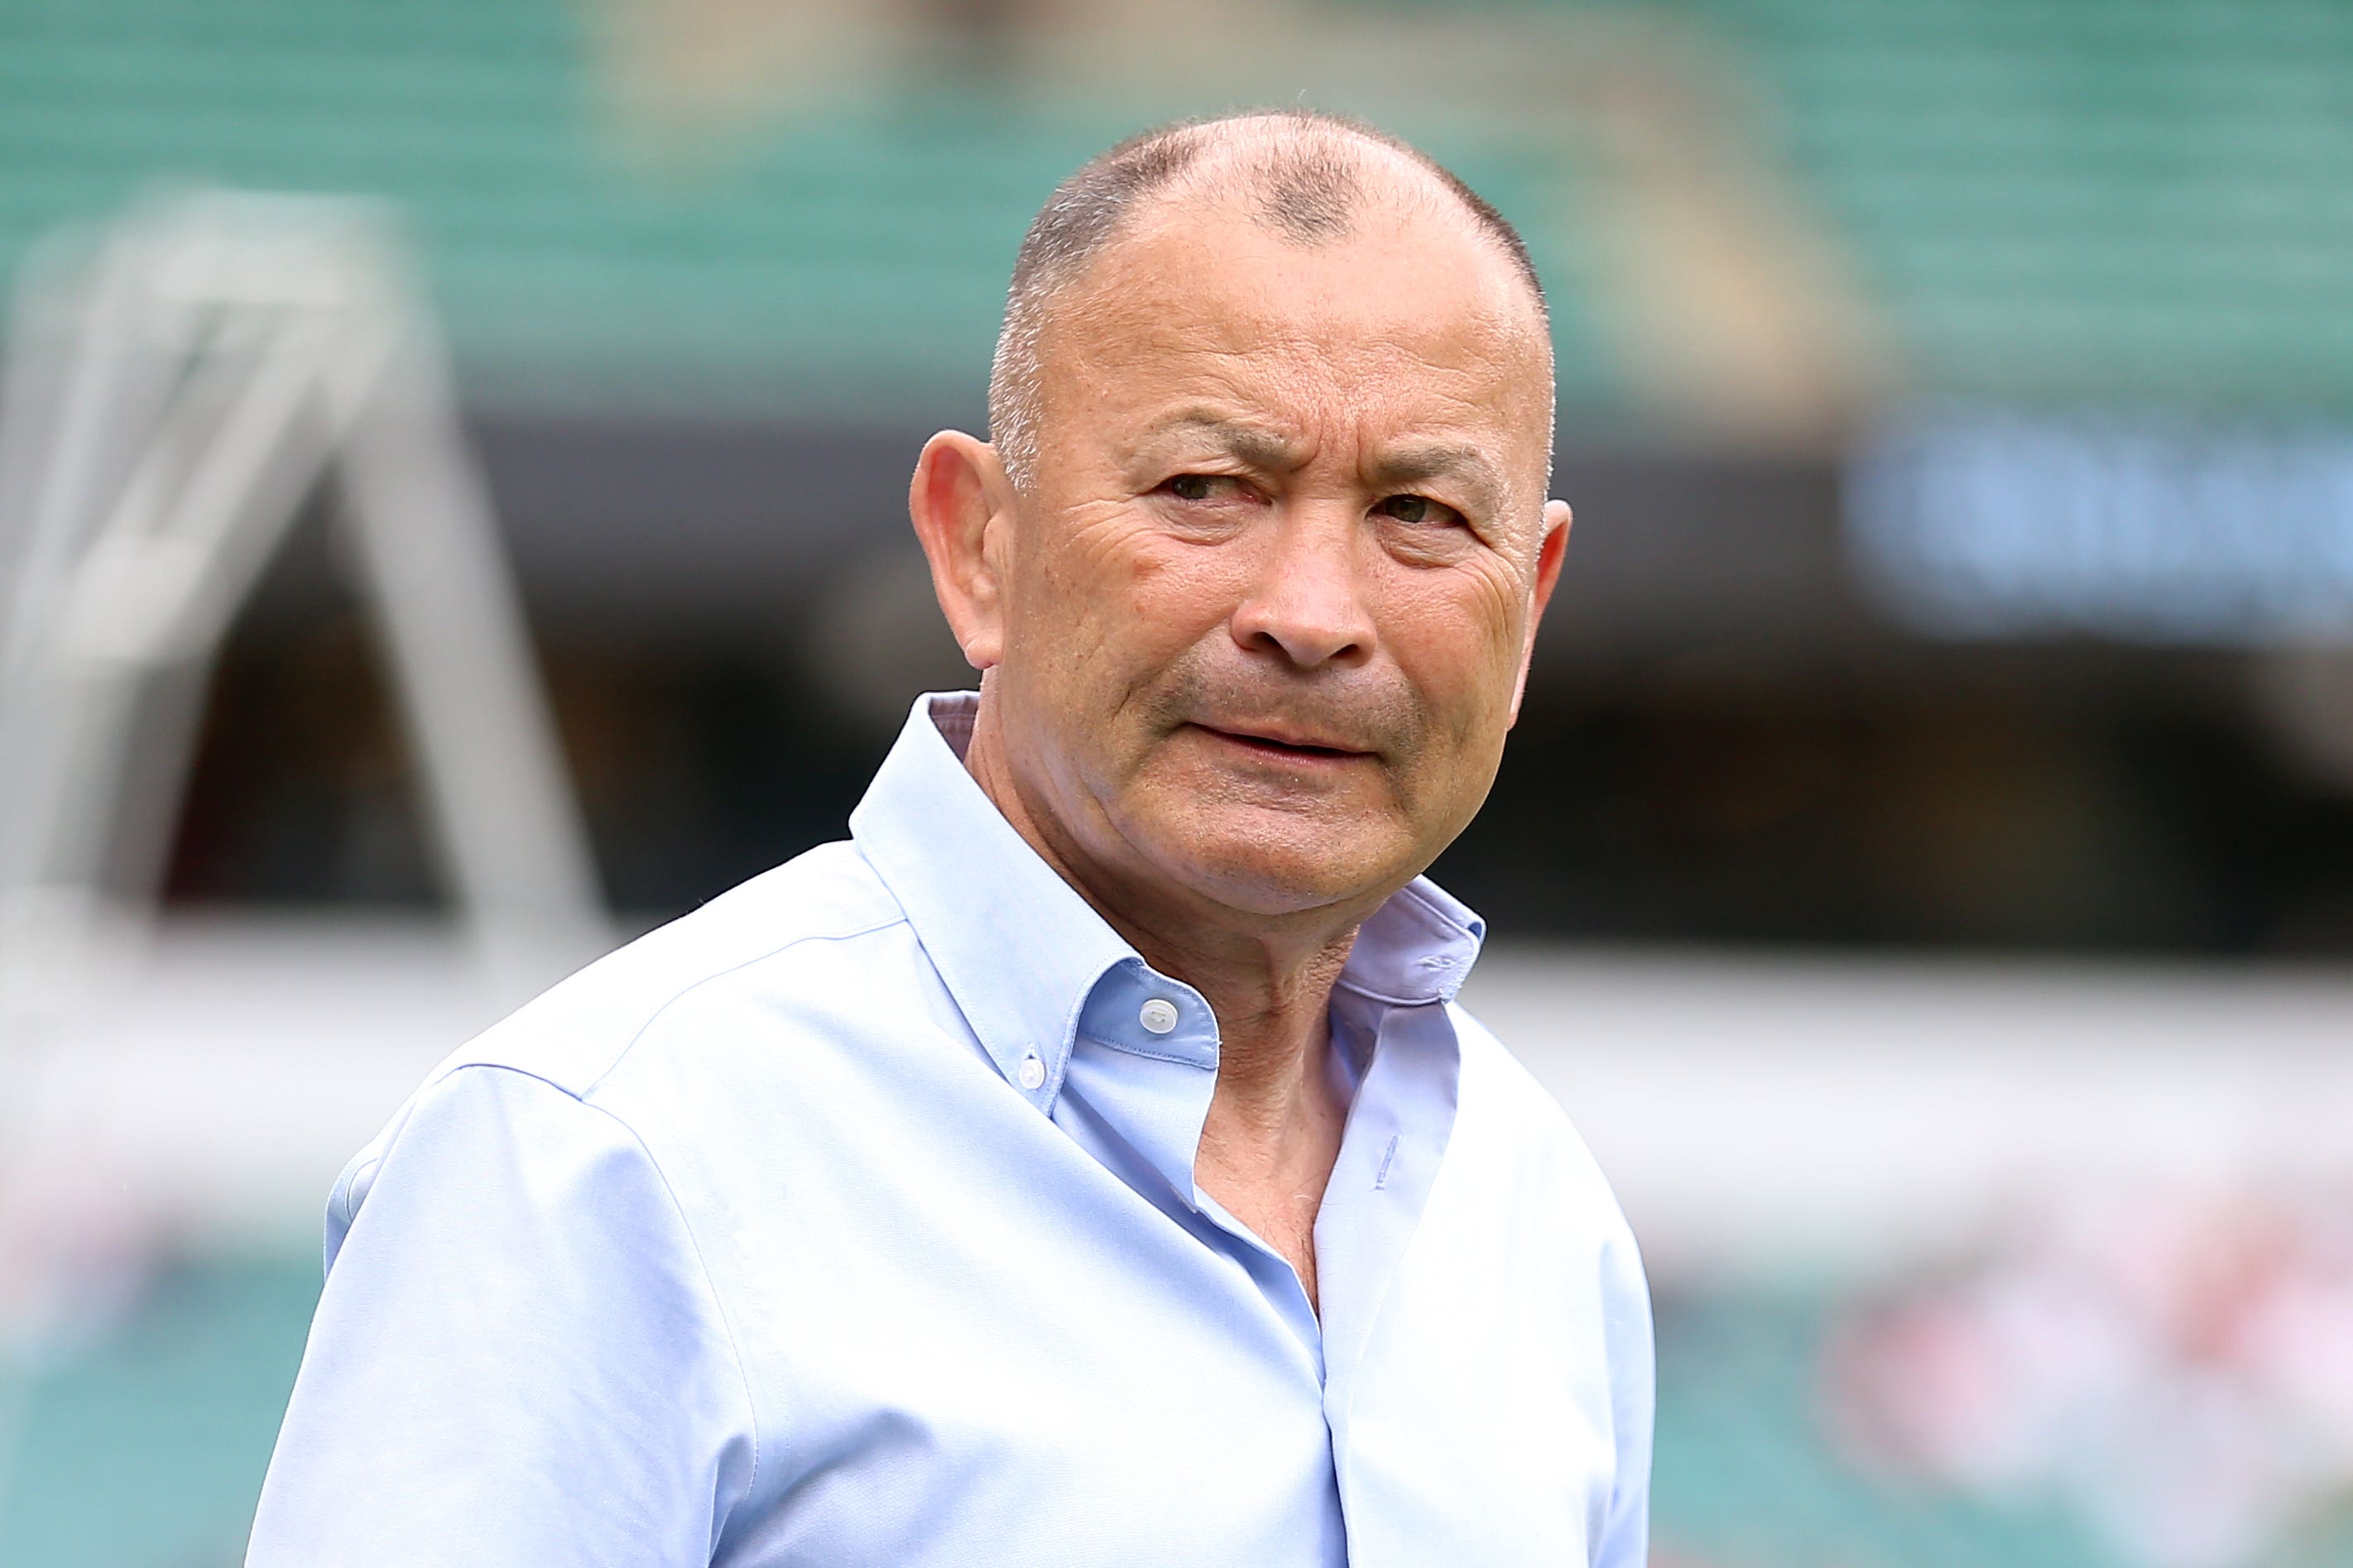 England coach Eddie Jones oversees a side striving for identity